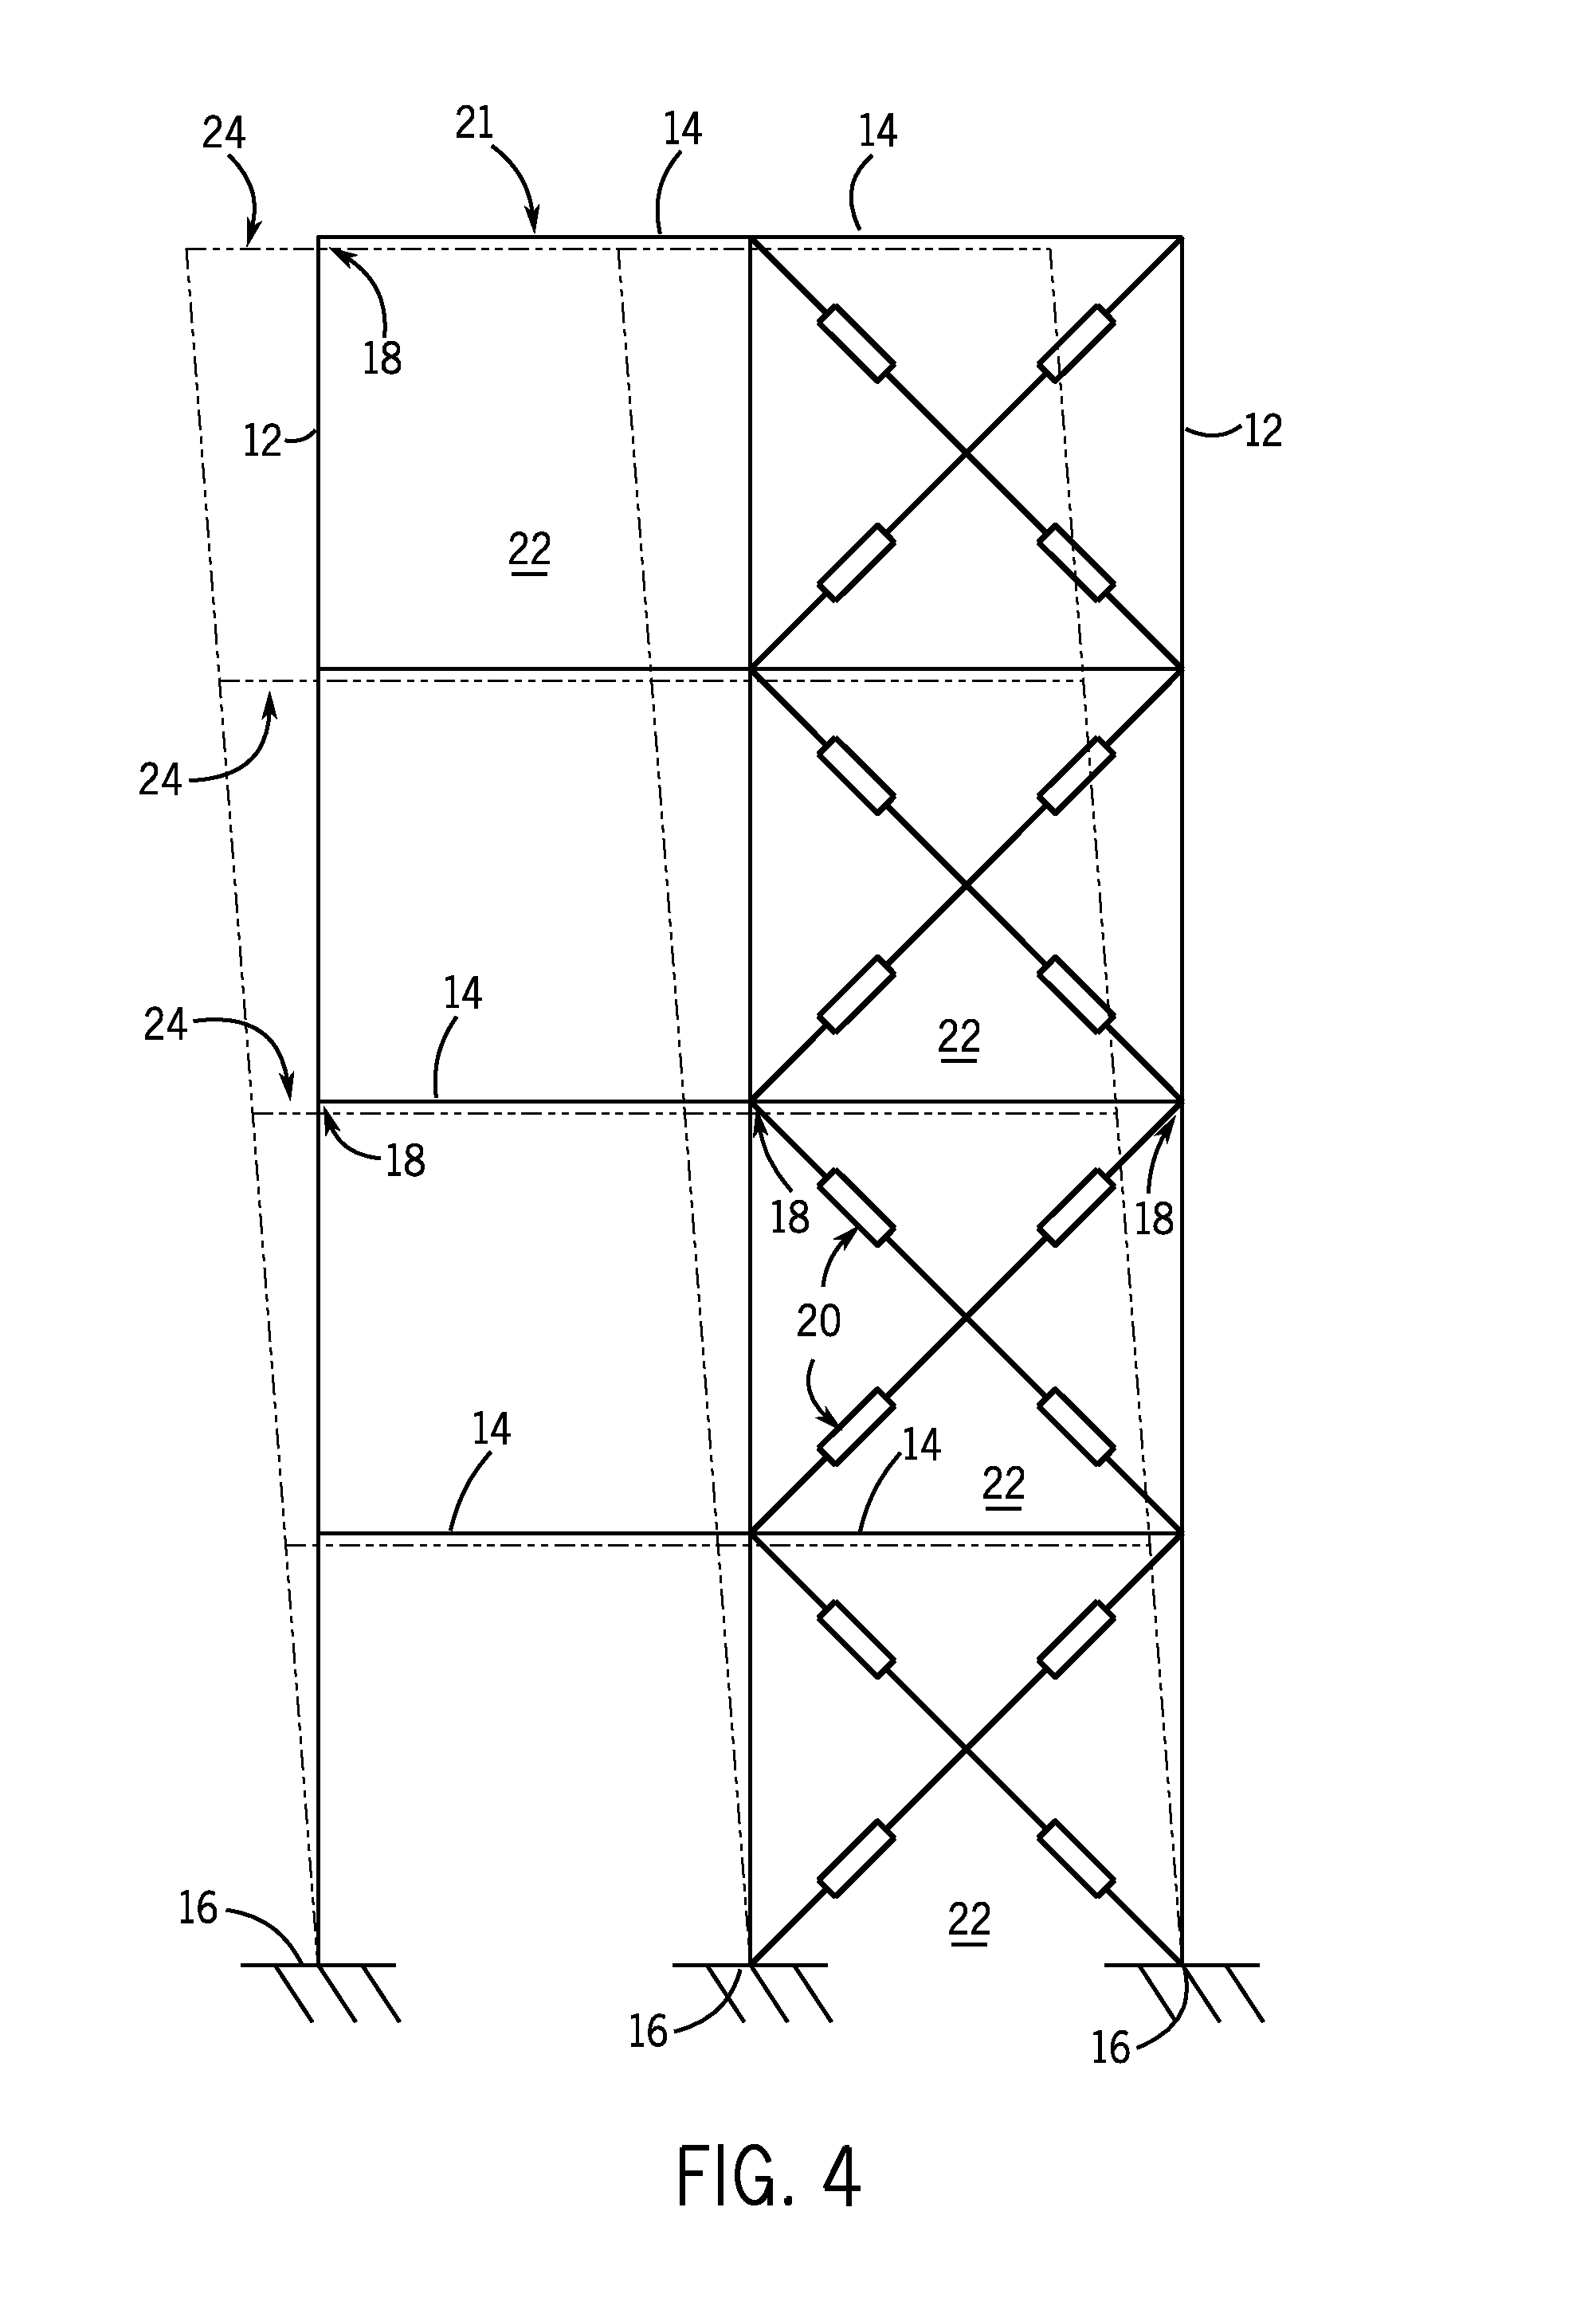 Structural connection mechanisms for providing discontinuous elastic behavior in structural framing systems